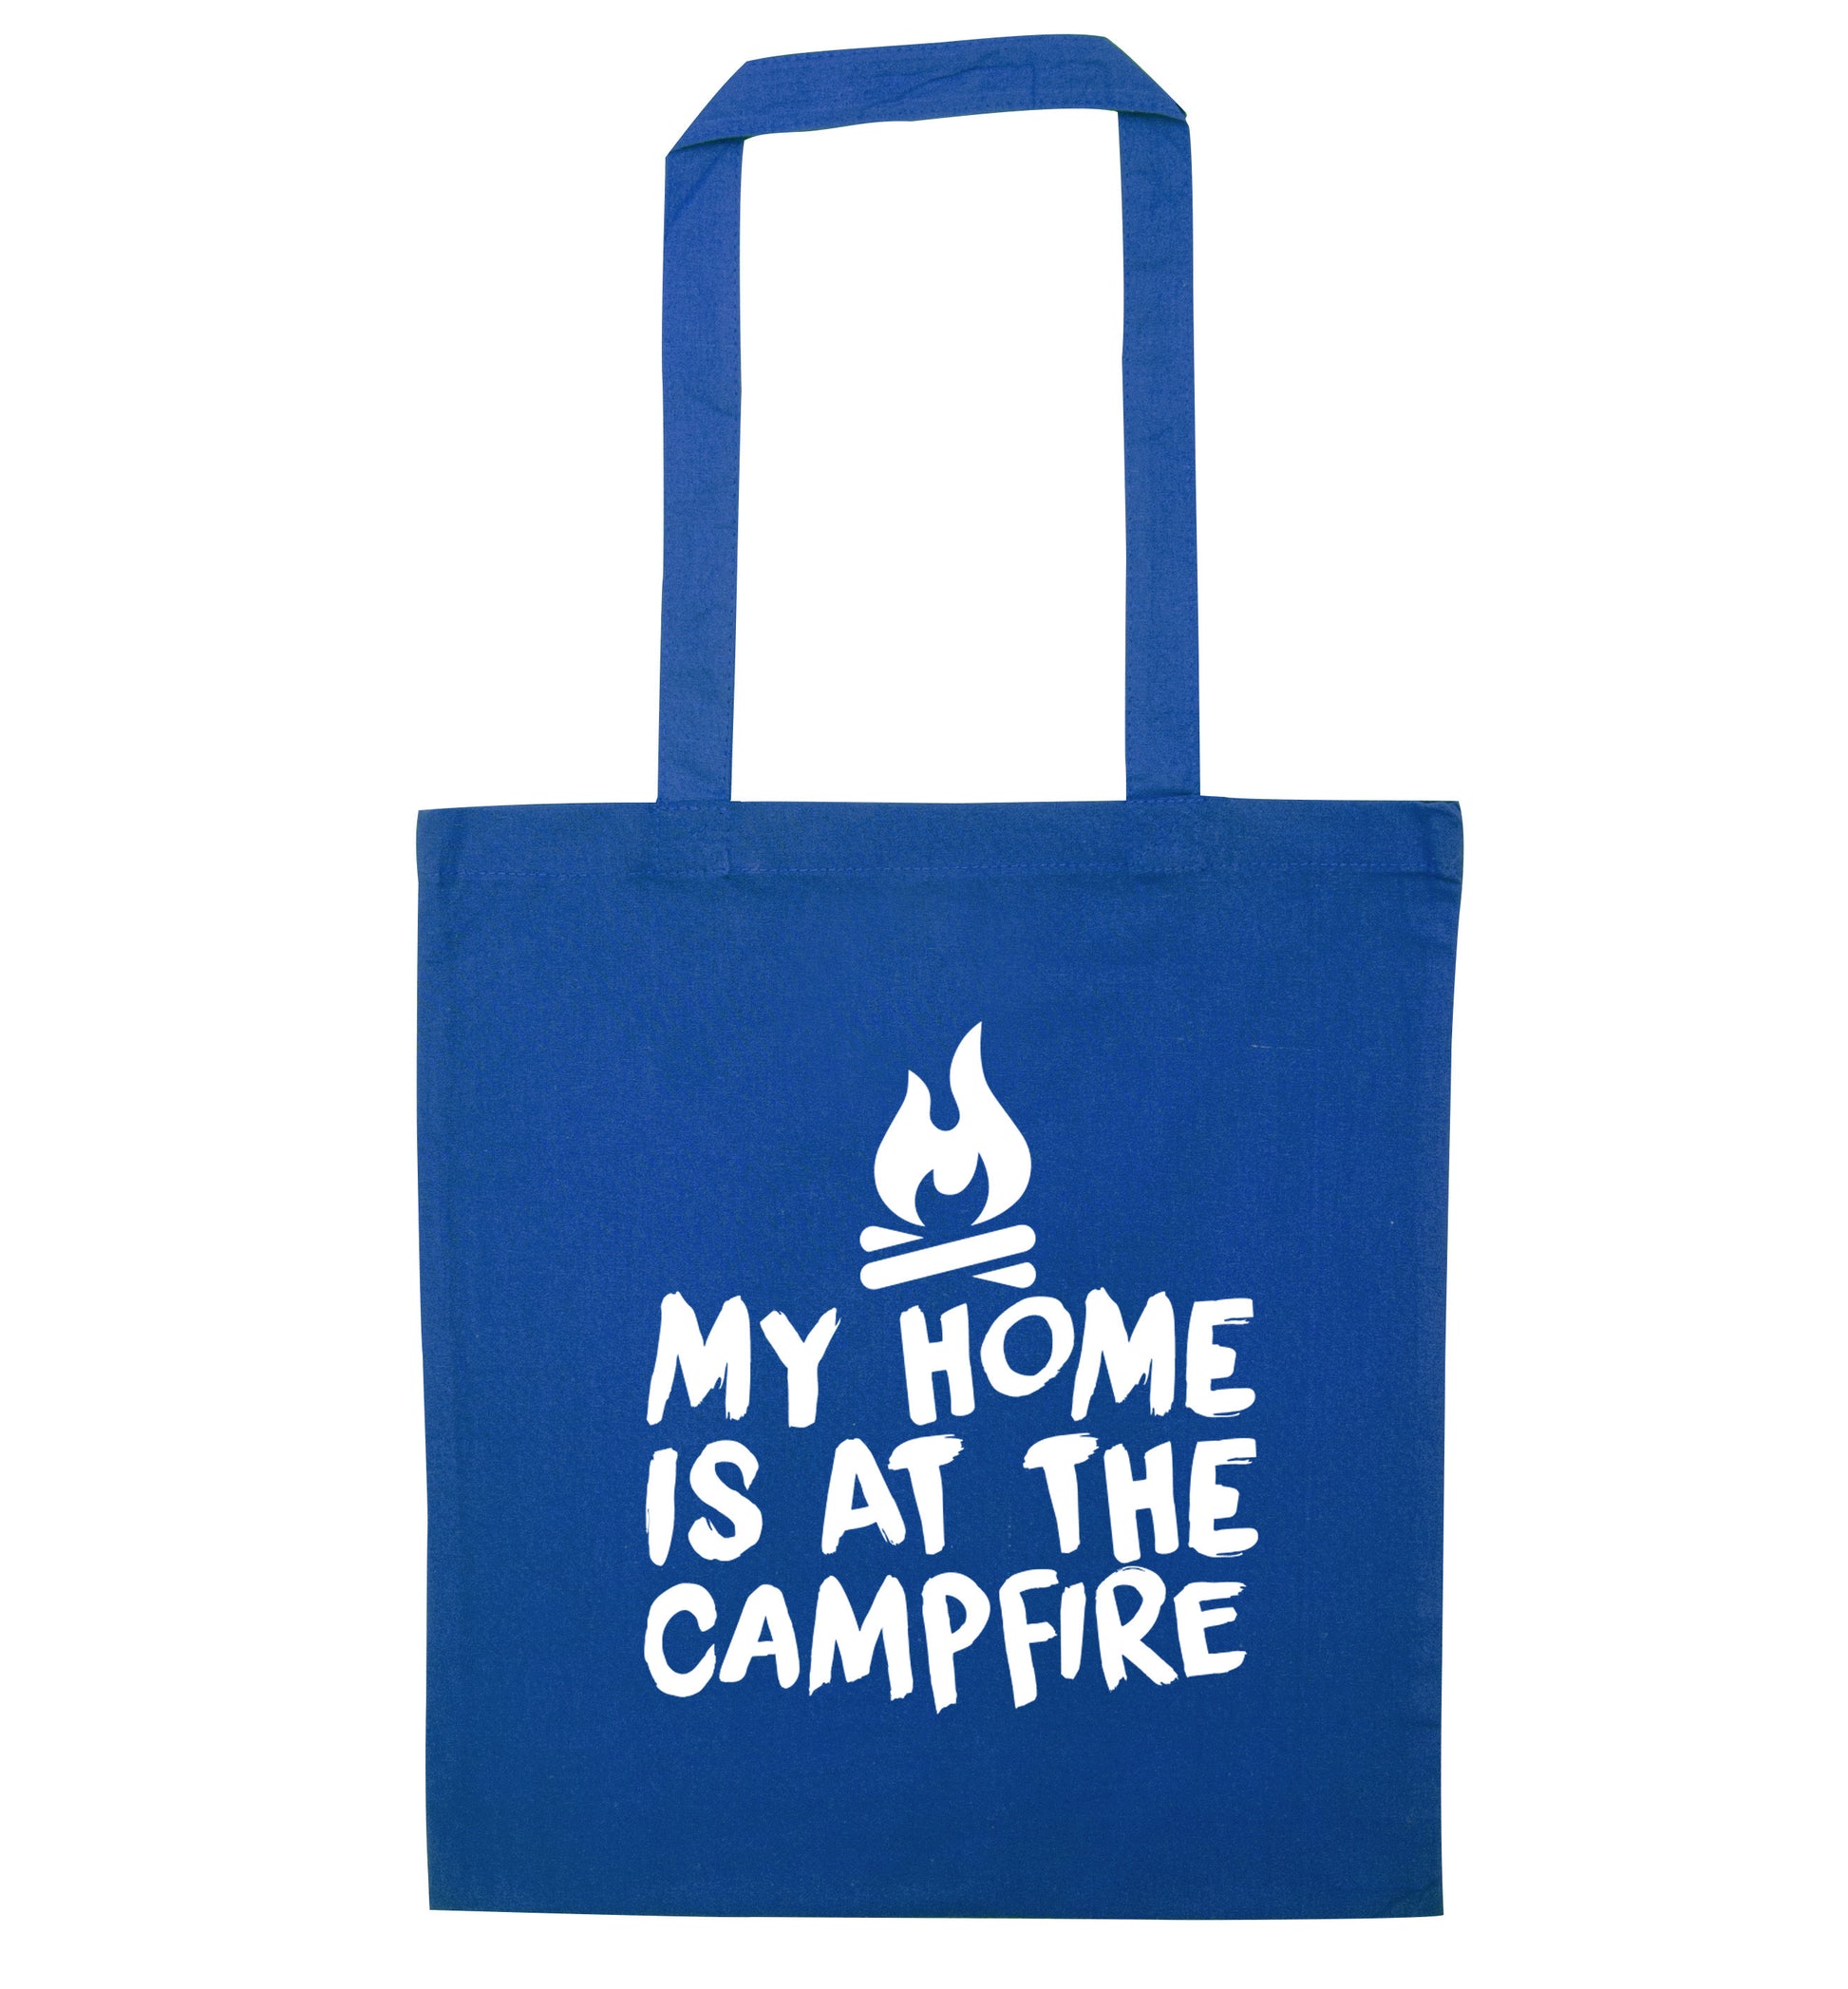 My home is at the campfire blue tote bag